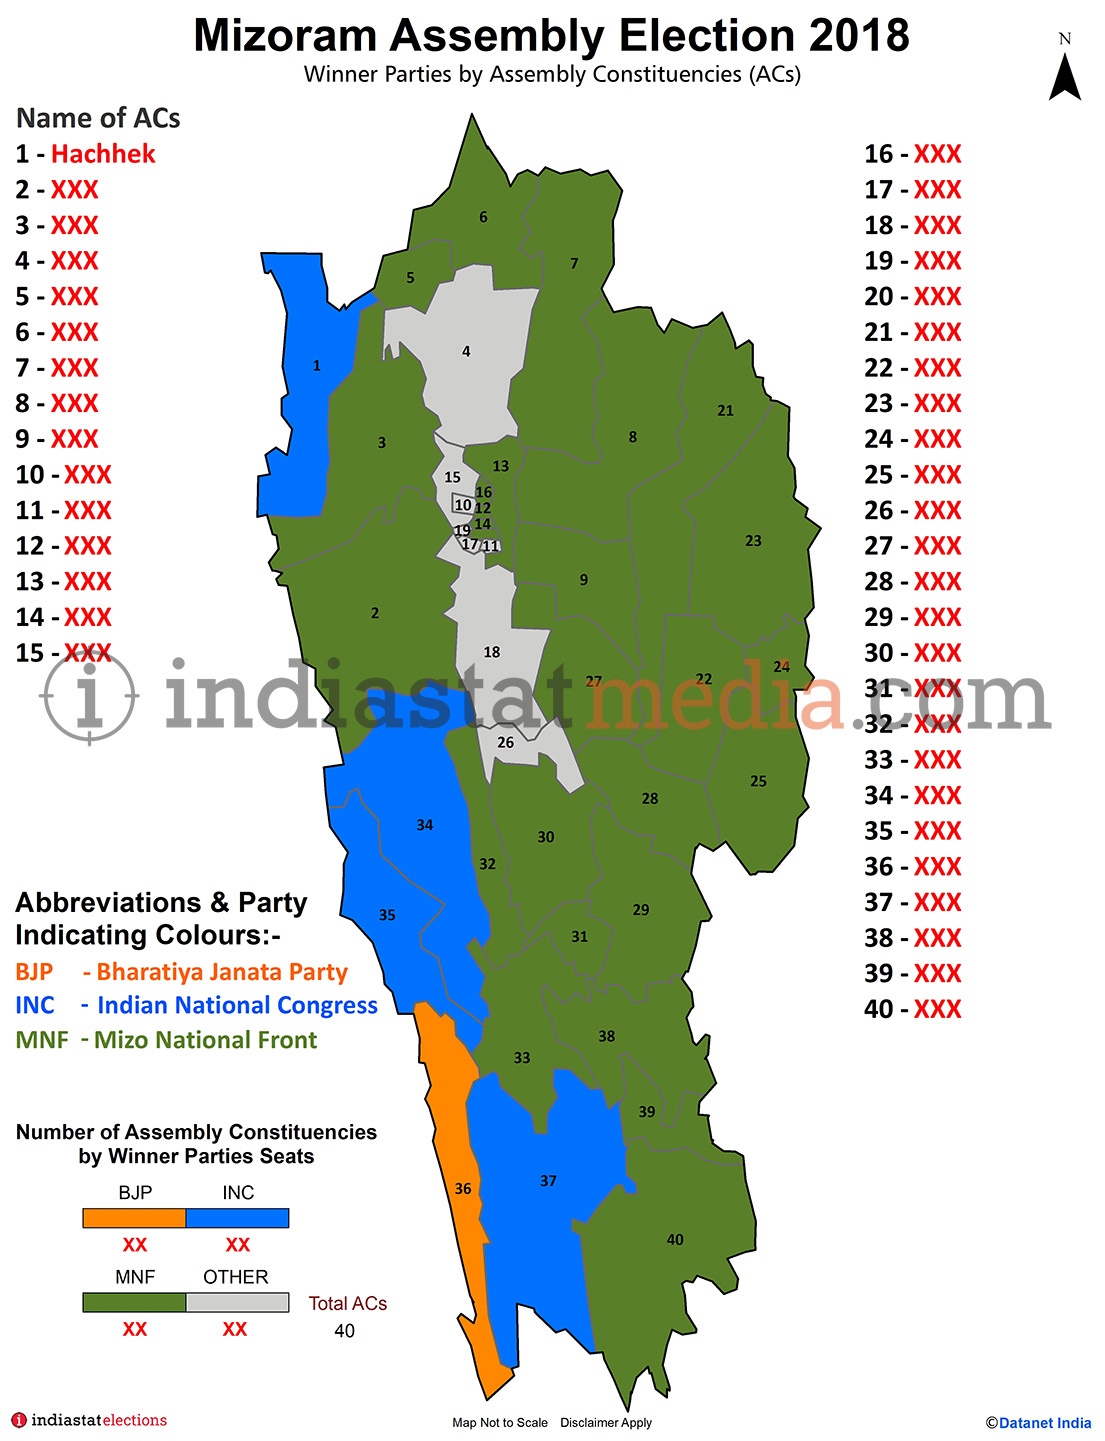 Winner Parties by Assembly Constituencies in Mizoram (Assembly Election - 2018)